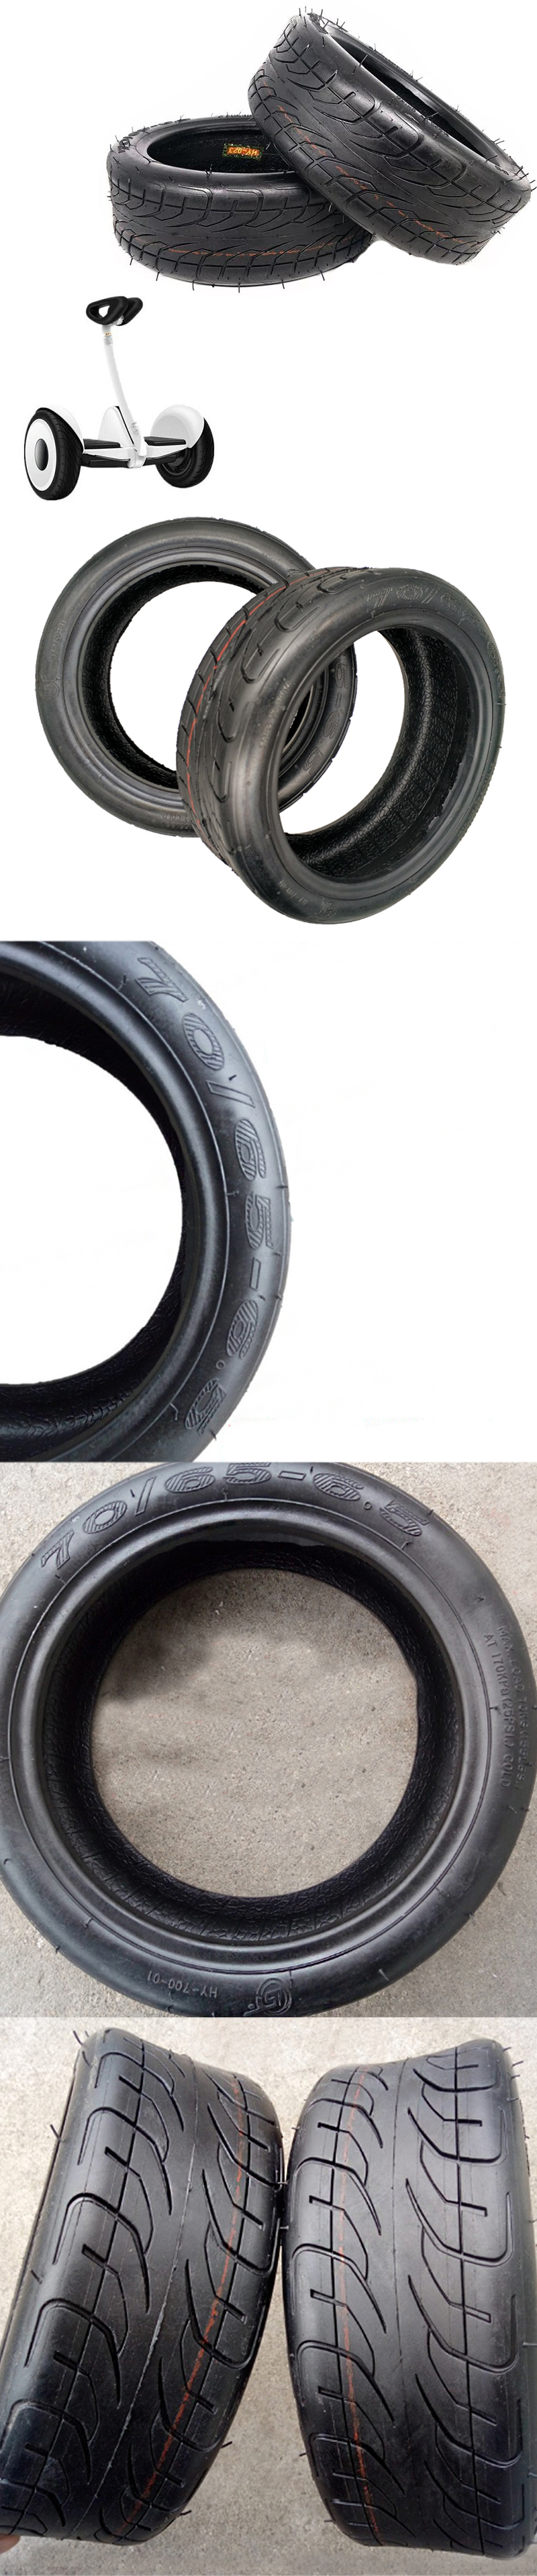 BIKIGHT-10inch-Scooter-Tire-For-Xiaomi-Balancing-Scooter-7065-65-1030-65-Vaccum-Thickened-Tire-Off-R-1380505